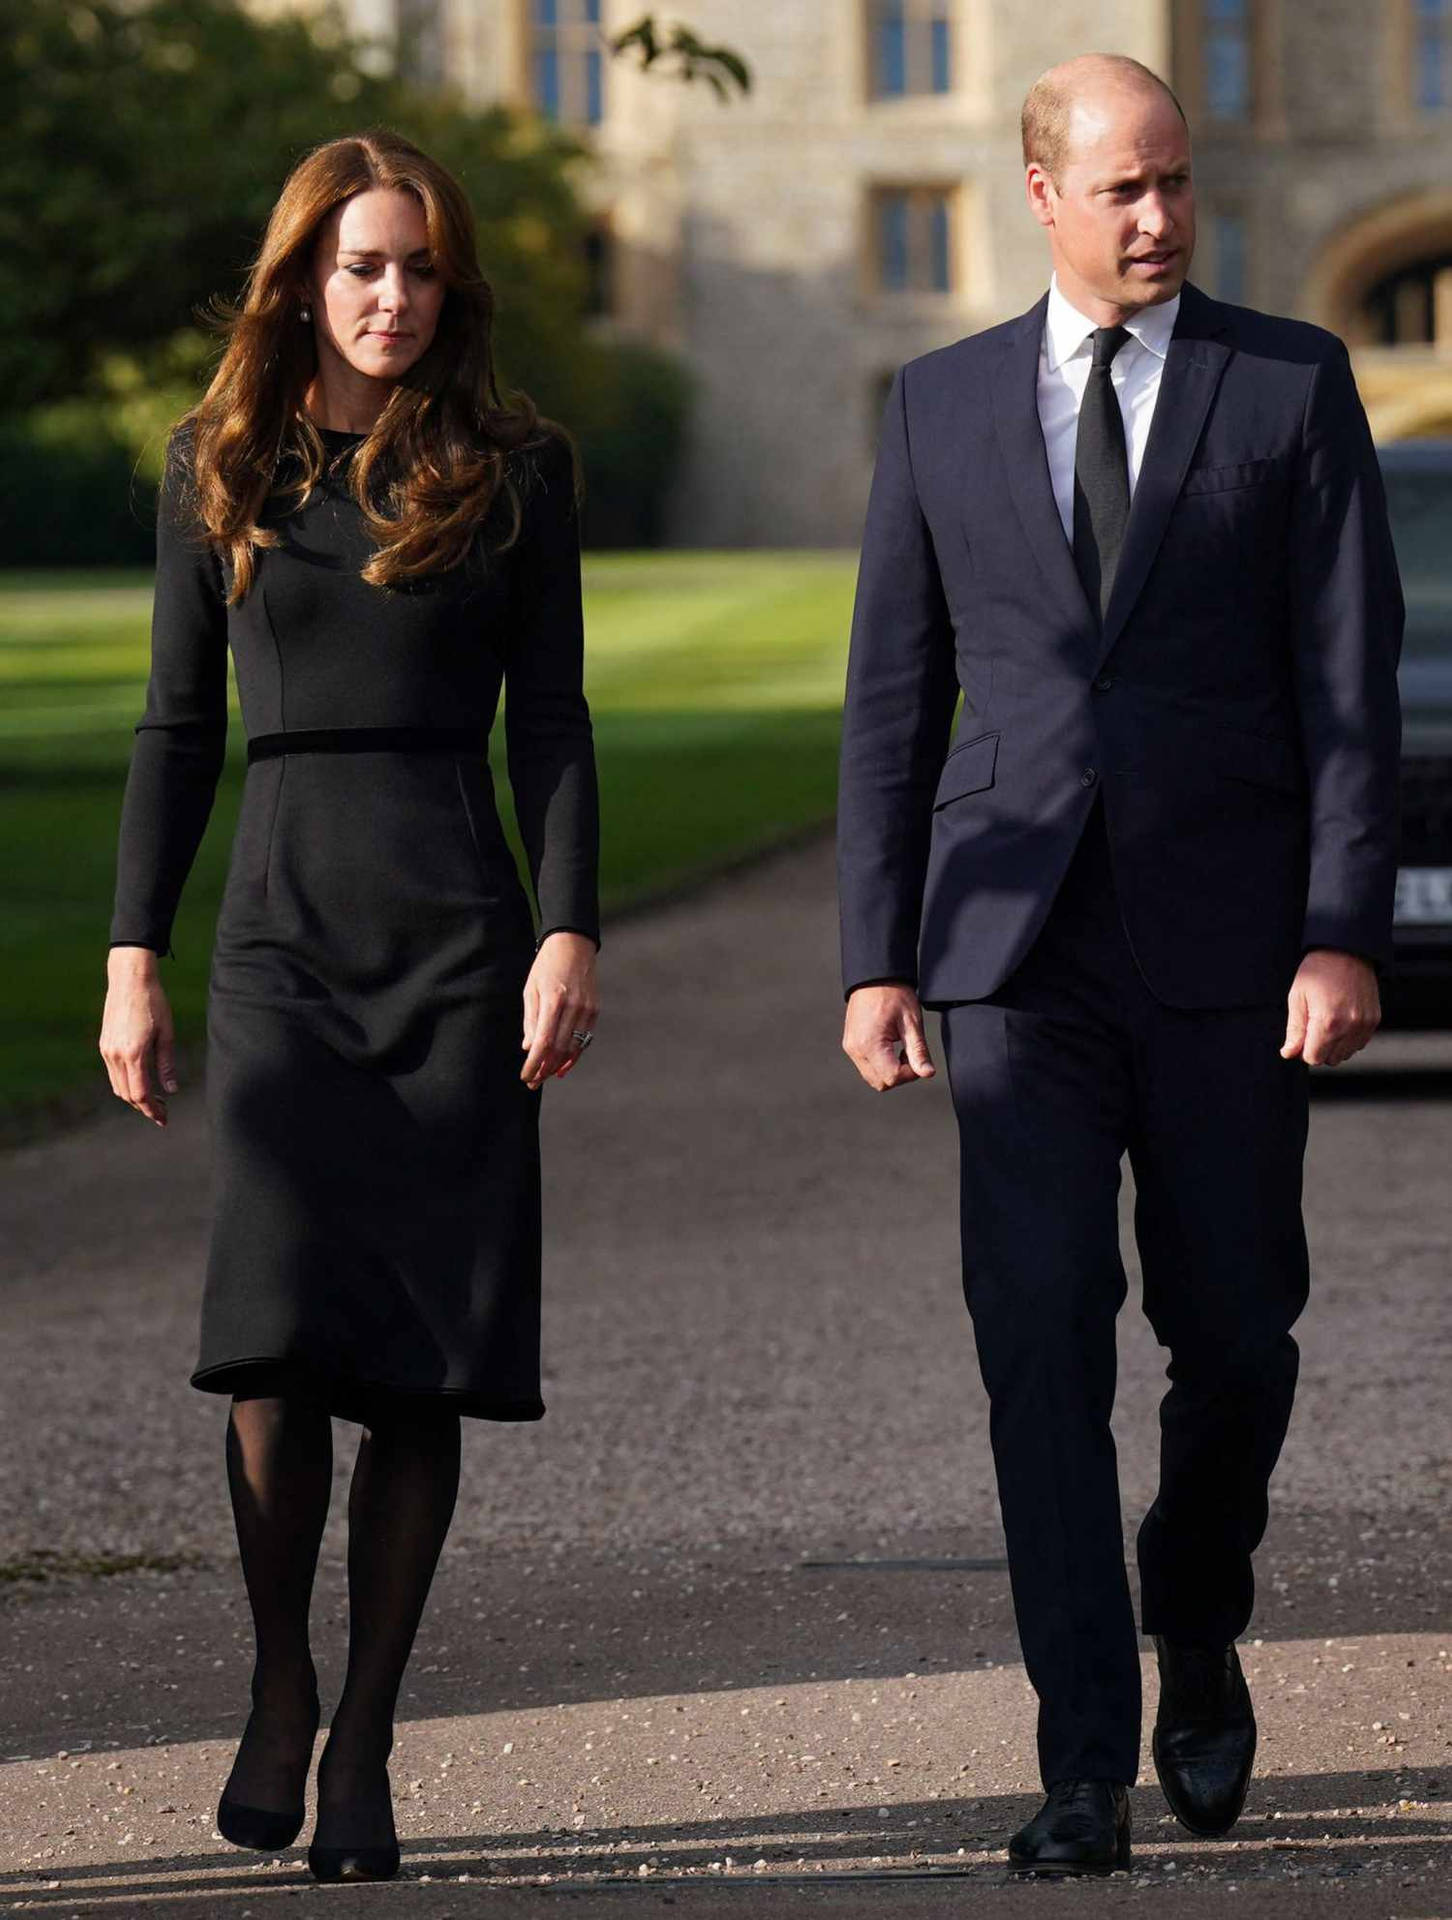 Kate And William Walk Past A Car In Front Of A Castle Wallpaper